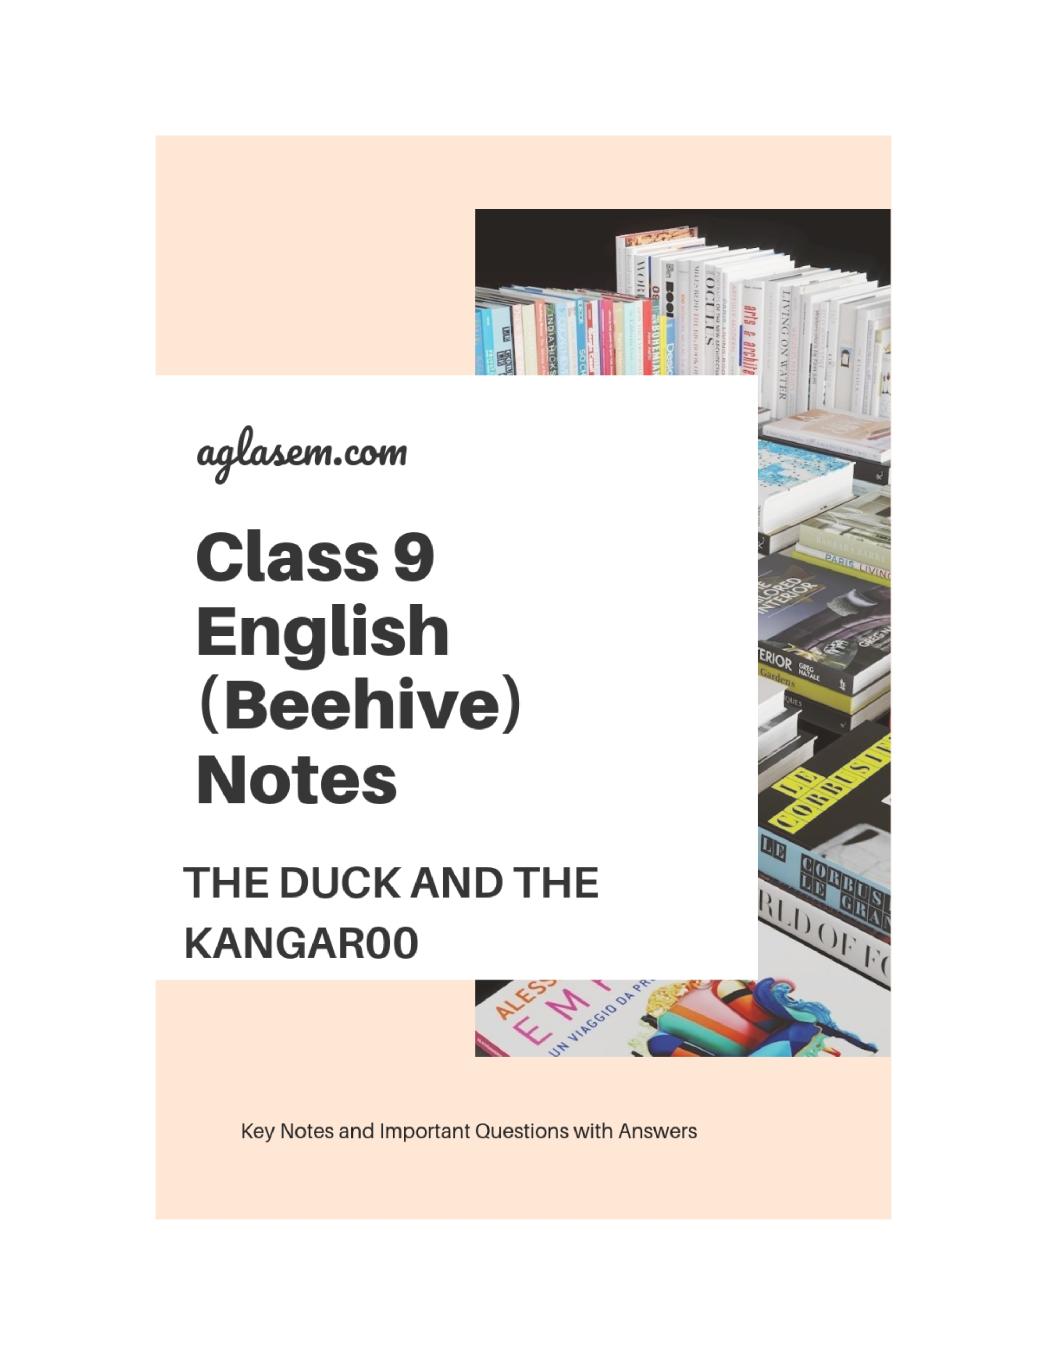 Class 9 English Beehive Notes For The Duck and the Kangaroo - Page 1